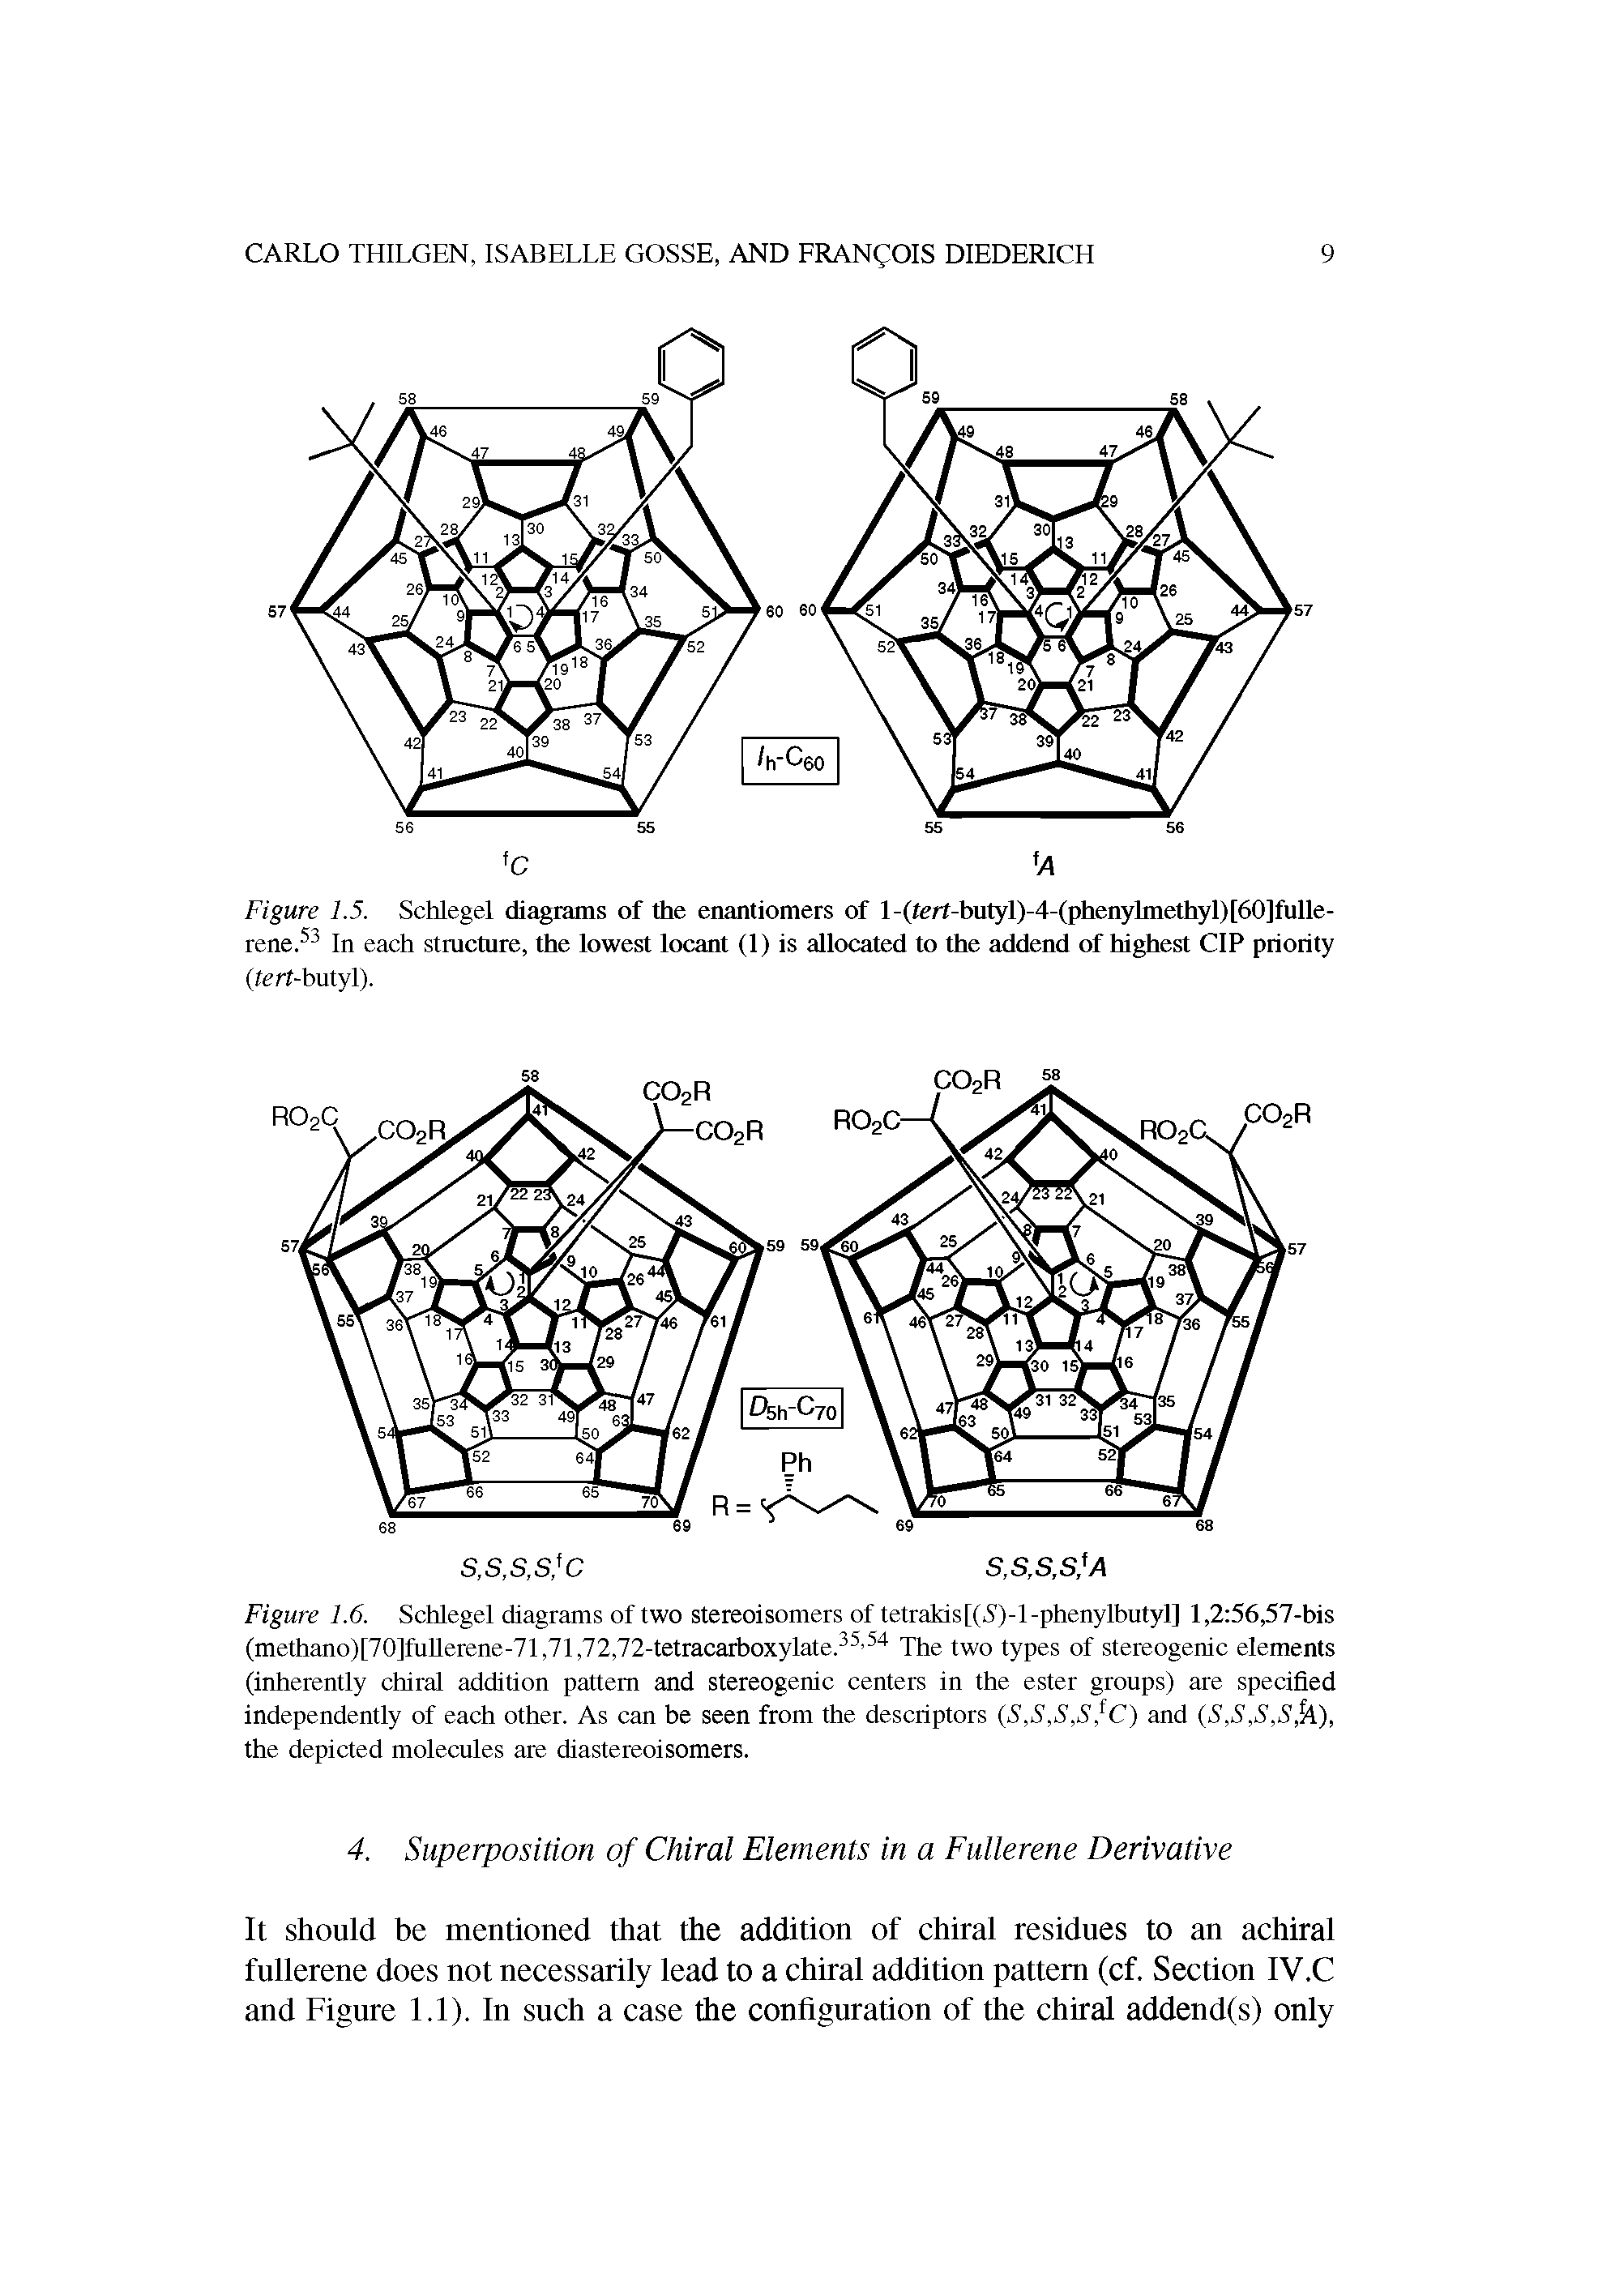 Figure 1.6. Schlegel diagrams of two stereoisomers of tetrakis[( )-l-phenylbutyl] l,2 56,57-bis (methano)[70]fullerene-71,71J2,72-tetracarboxylate.35 54 The two types of stereogenic elements (inherently chiral addition pattern and stereogenic centers in the ester groups) are specified independently of each other. As can be seen from the descriptors (S,S,S,S, C) and (S fA), the depicted molecules are diastereoisomers.